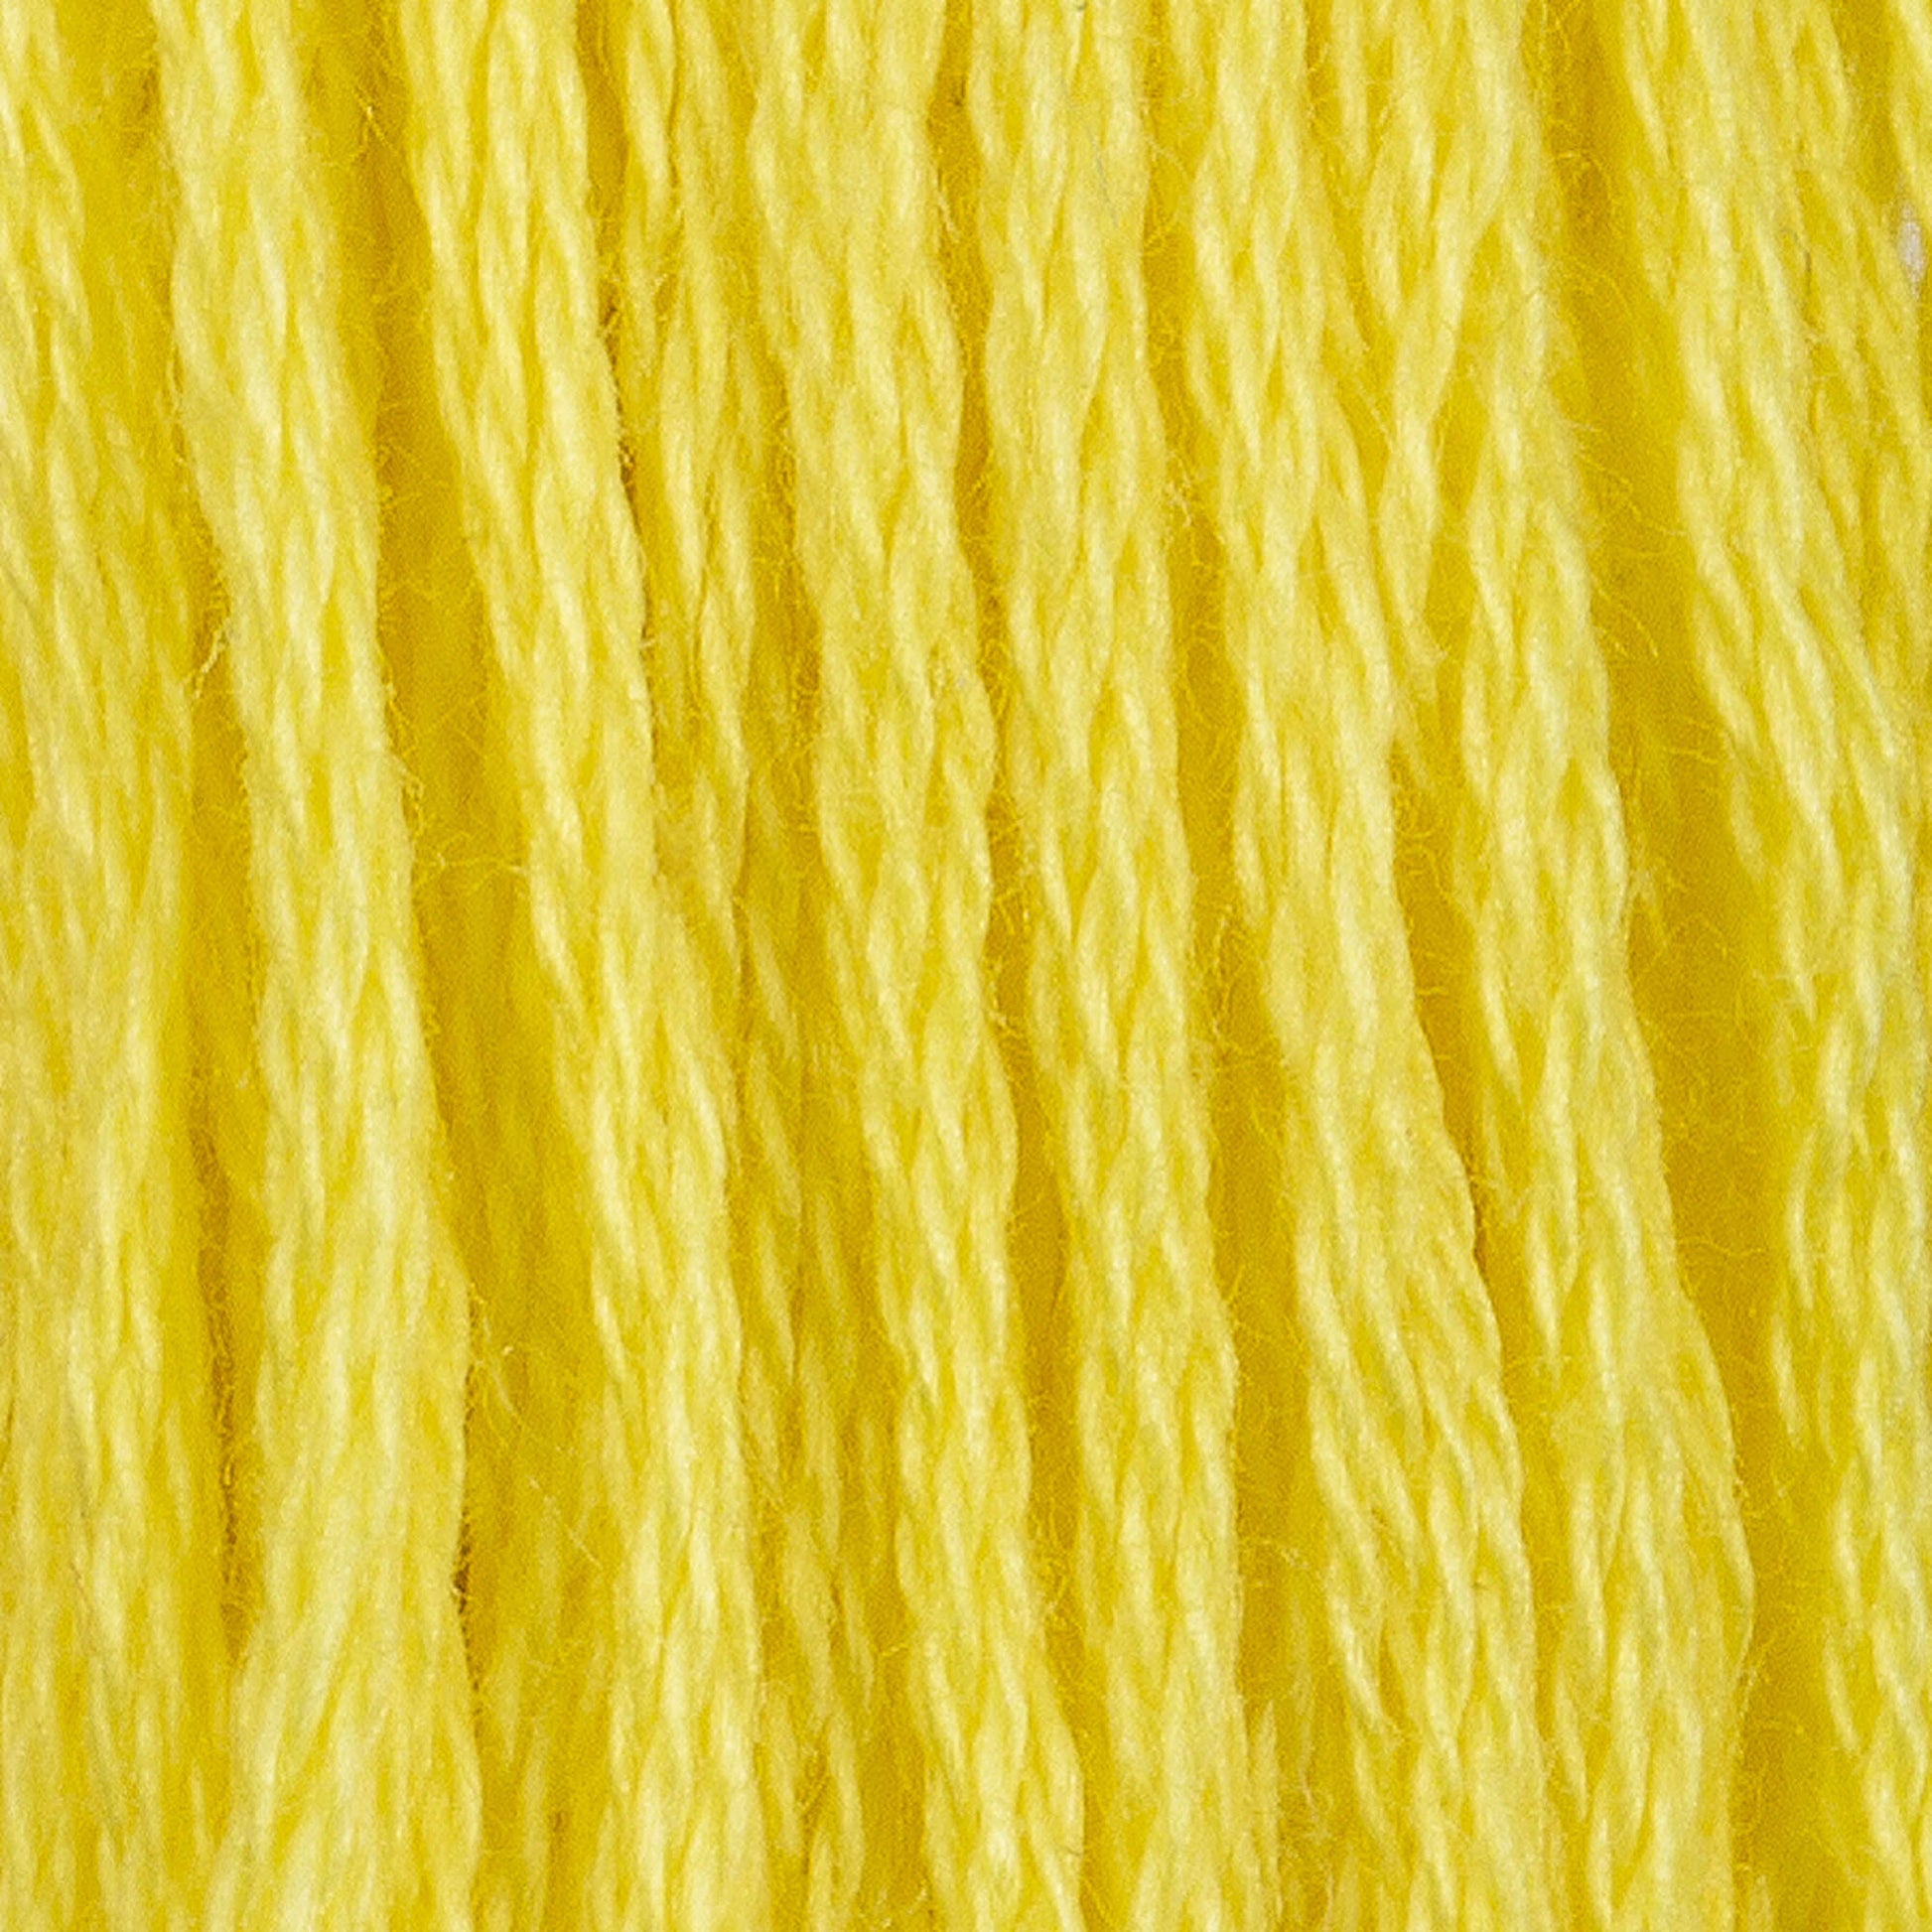 Coats & Clark Cotton Embroidery Floss Canary Bright